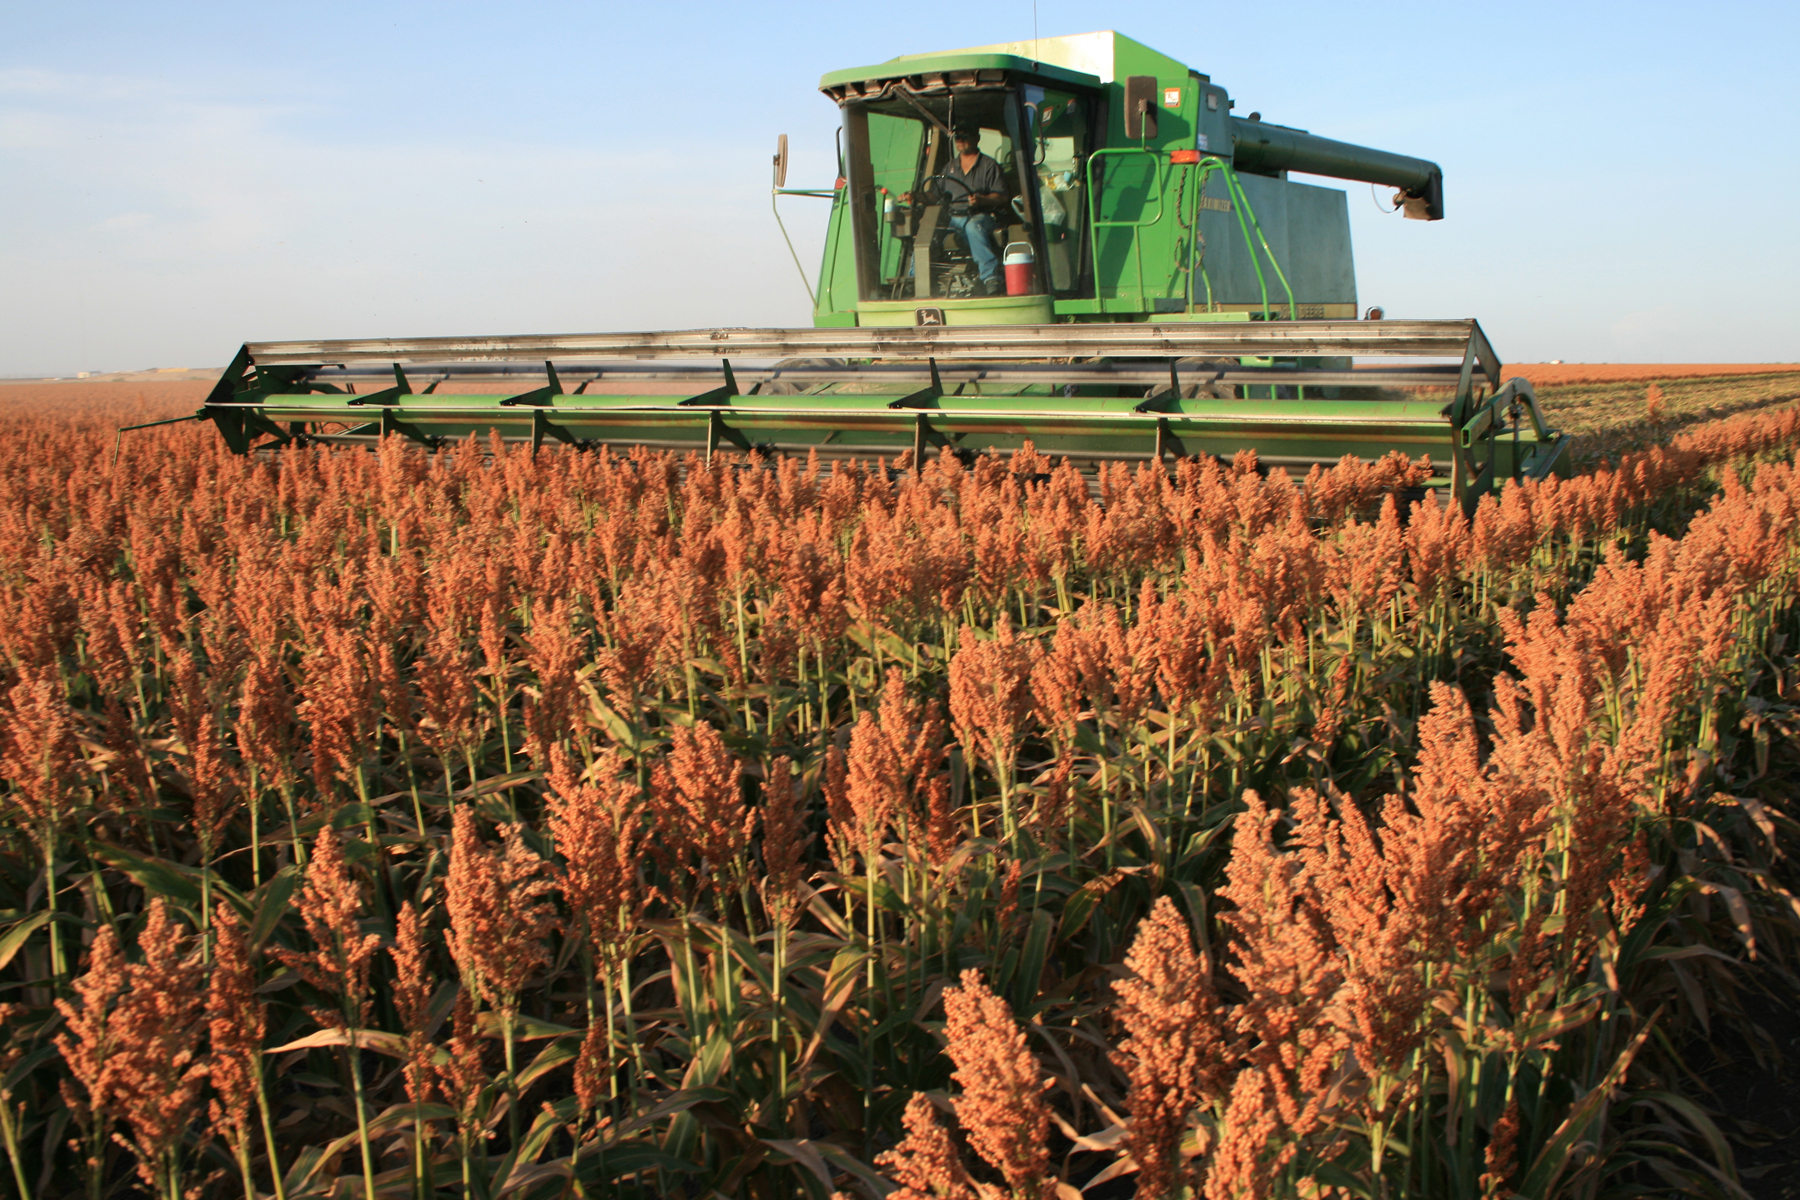 Sparked by Strong Demand, Sorghum a Bright Spot Among Ag Commodities